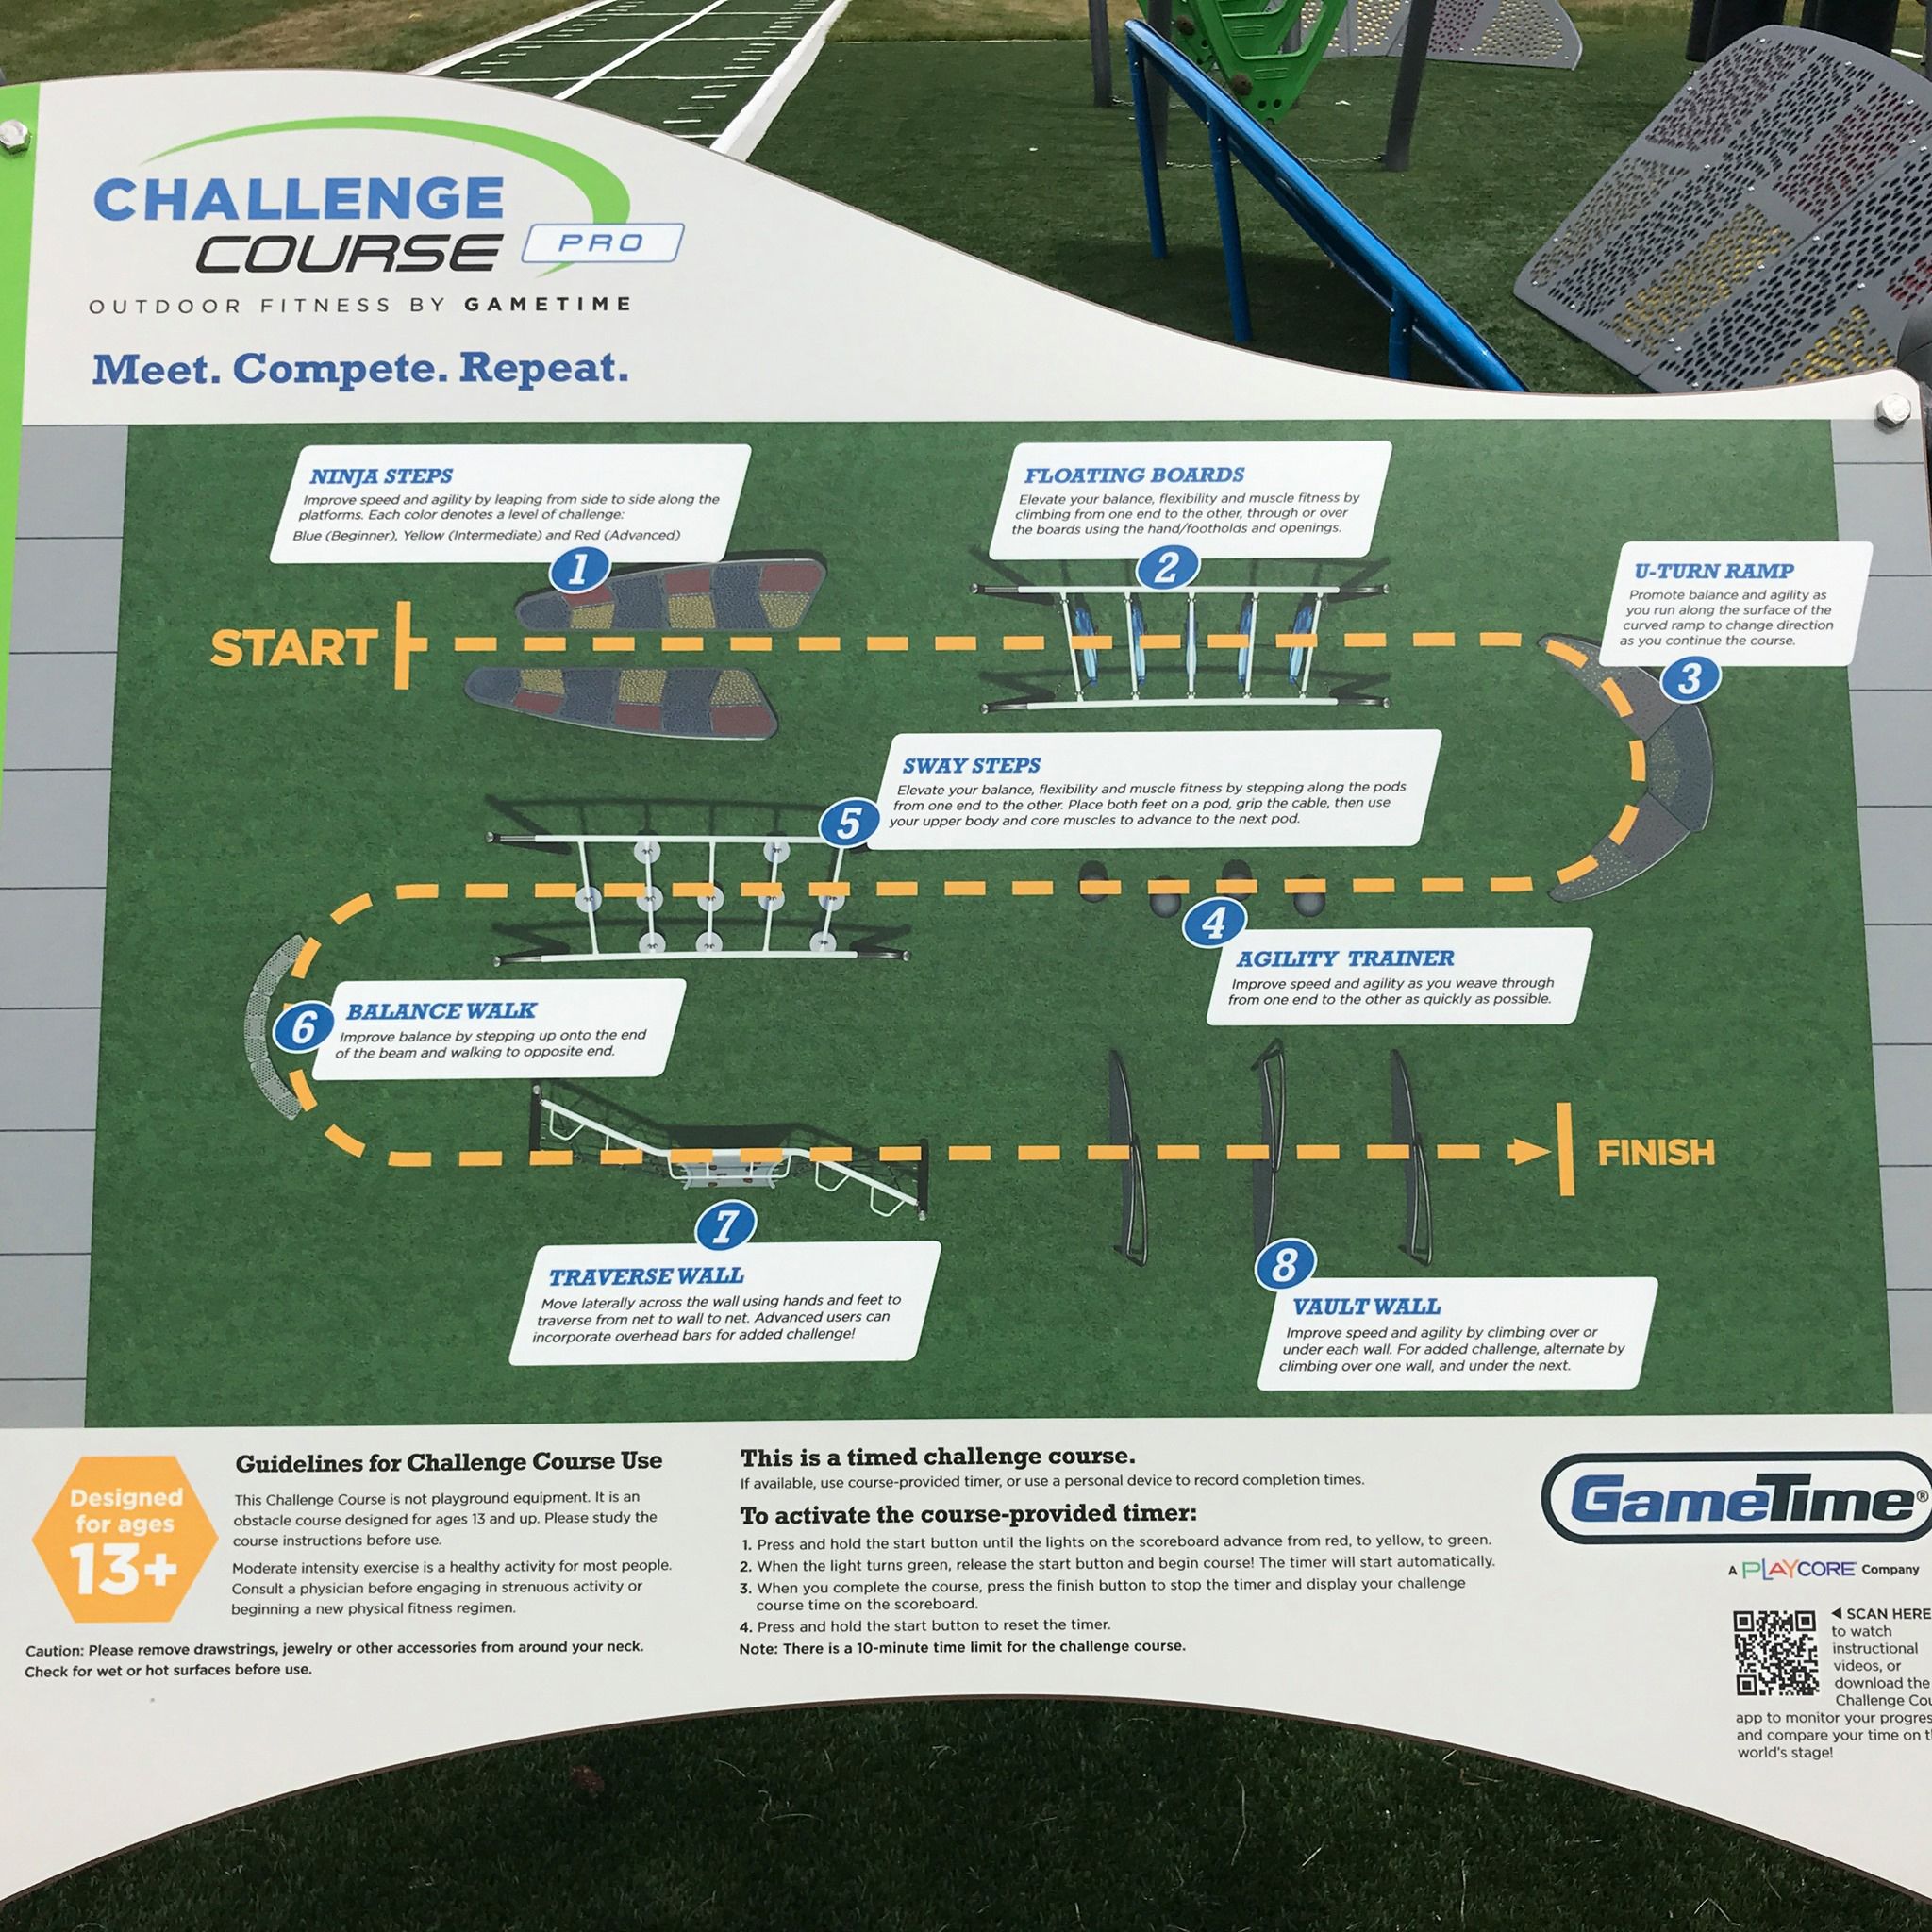 Challenge Course guide sign